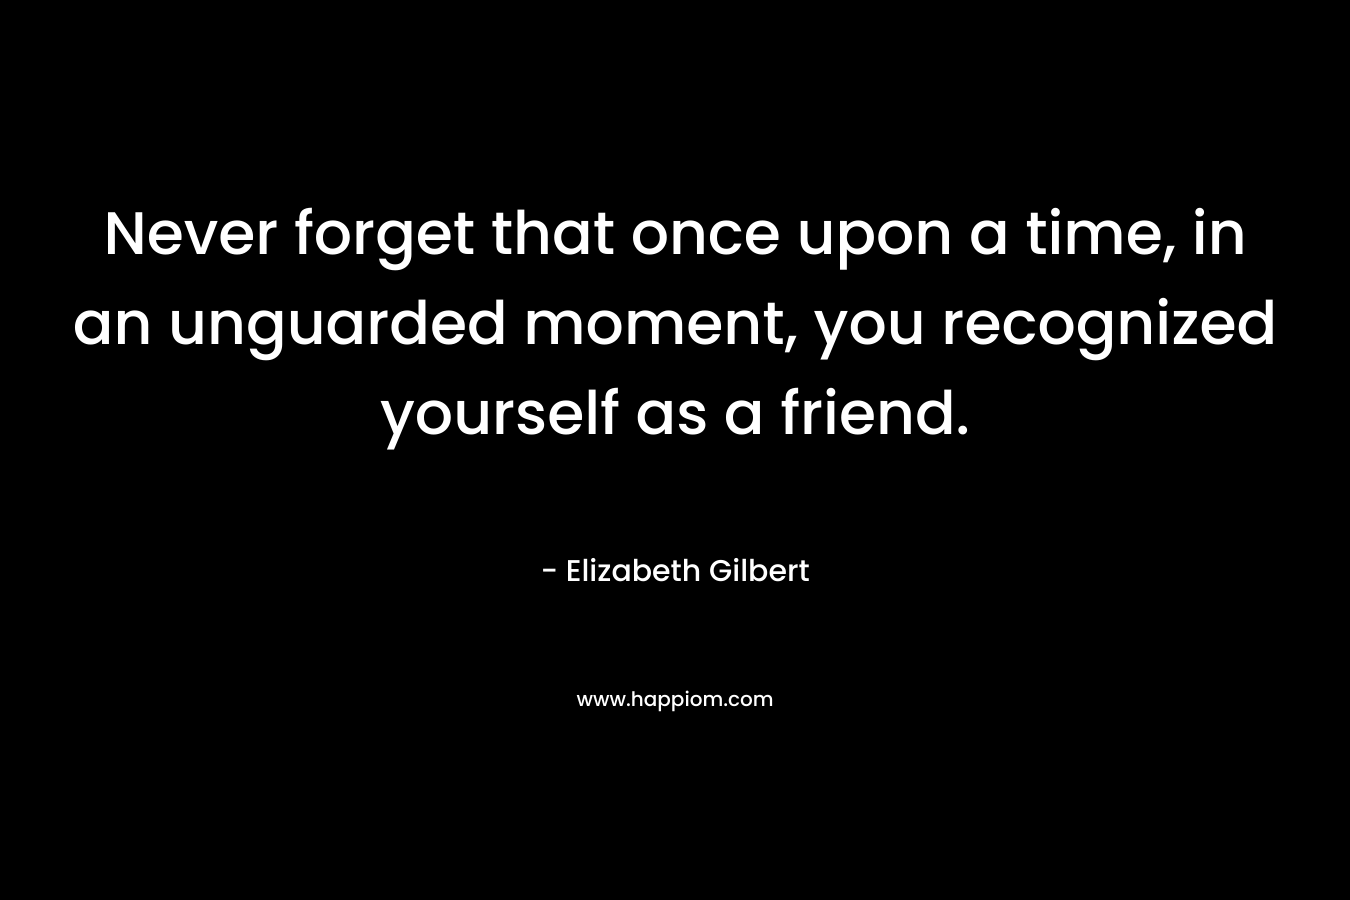 Never forget that once upon a time, in an unguarded moment, you recognized yourself as a friend. – Elizabeth Gilbert